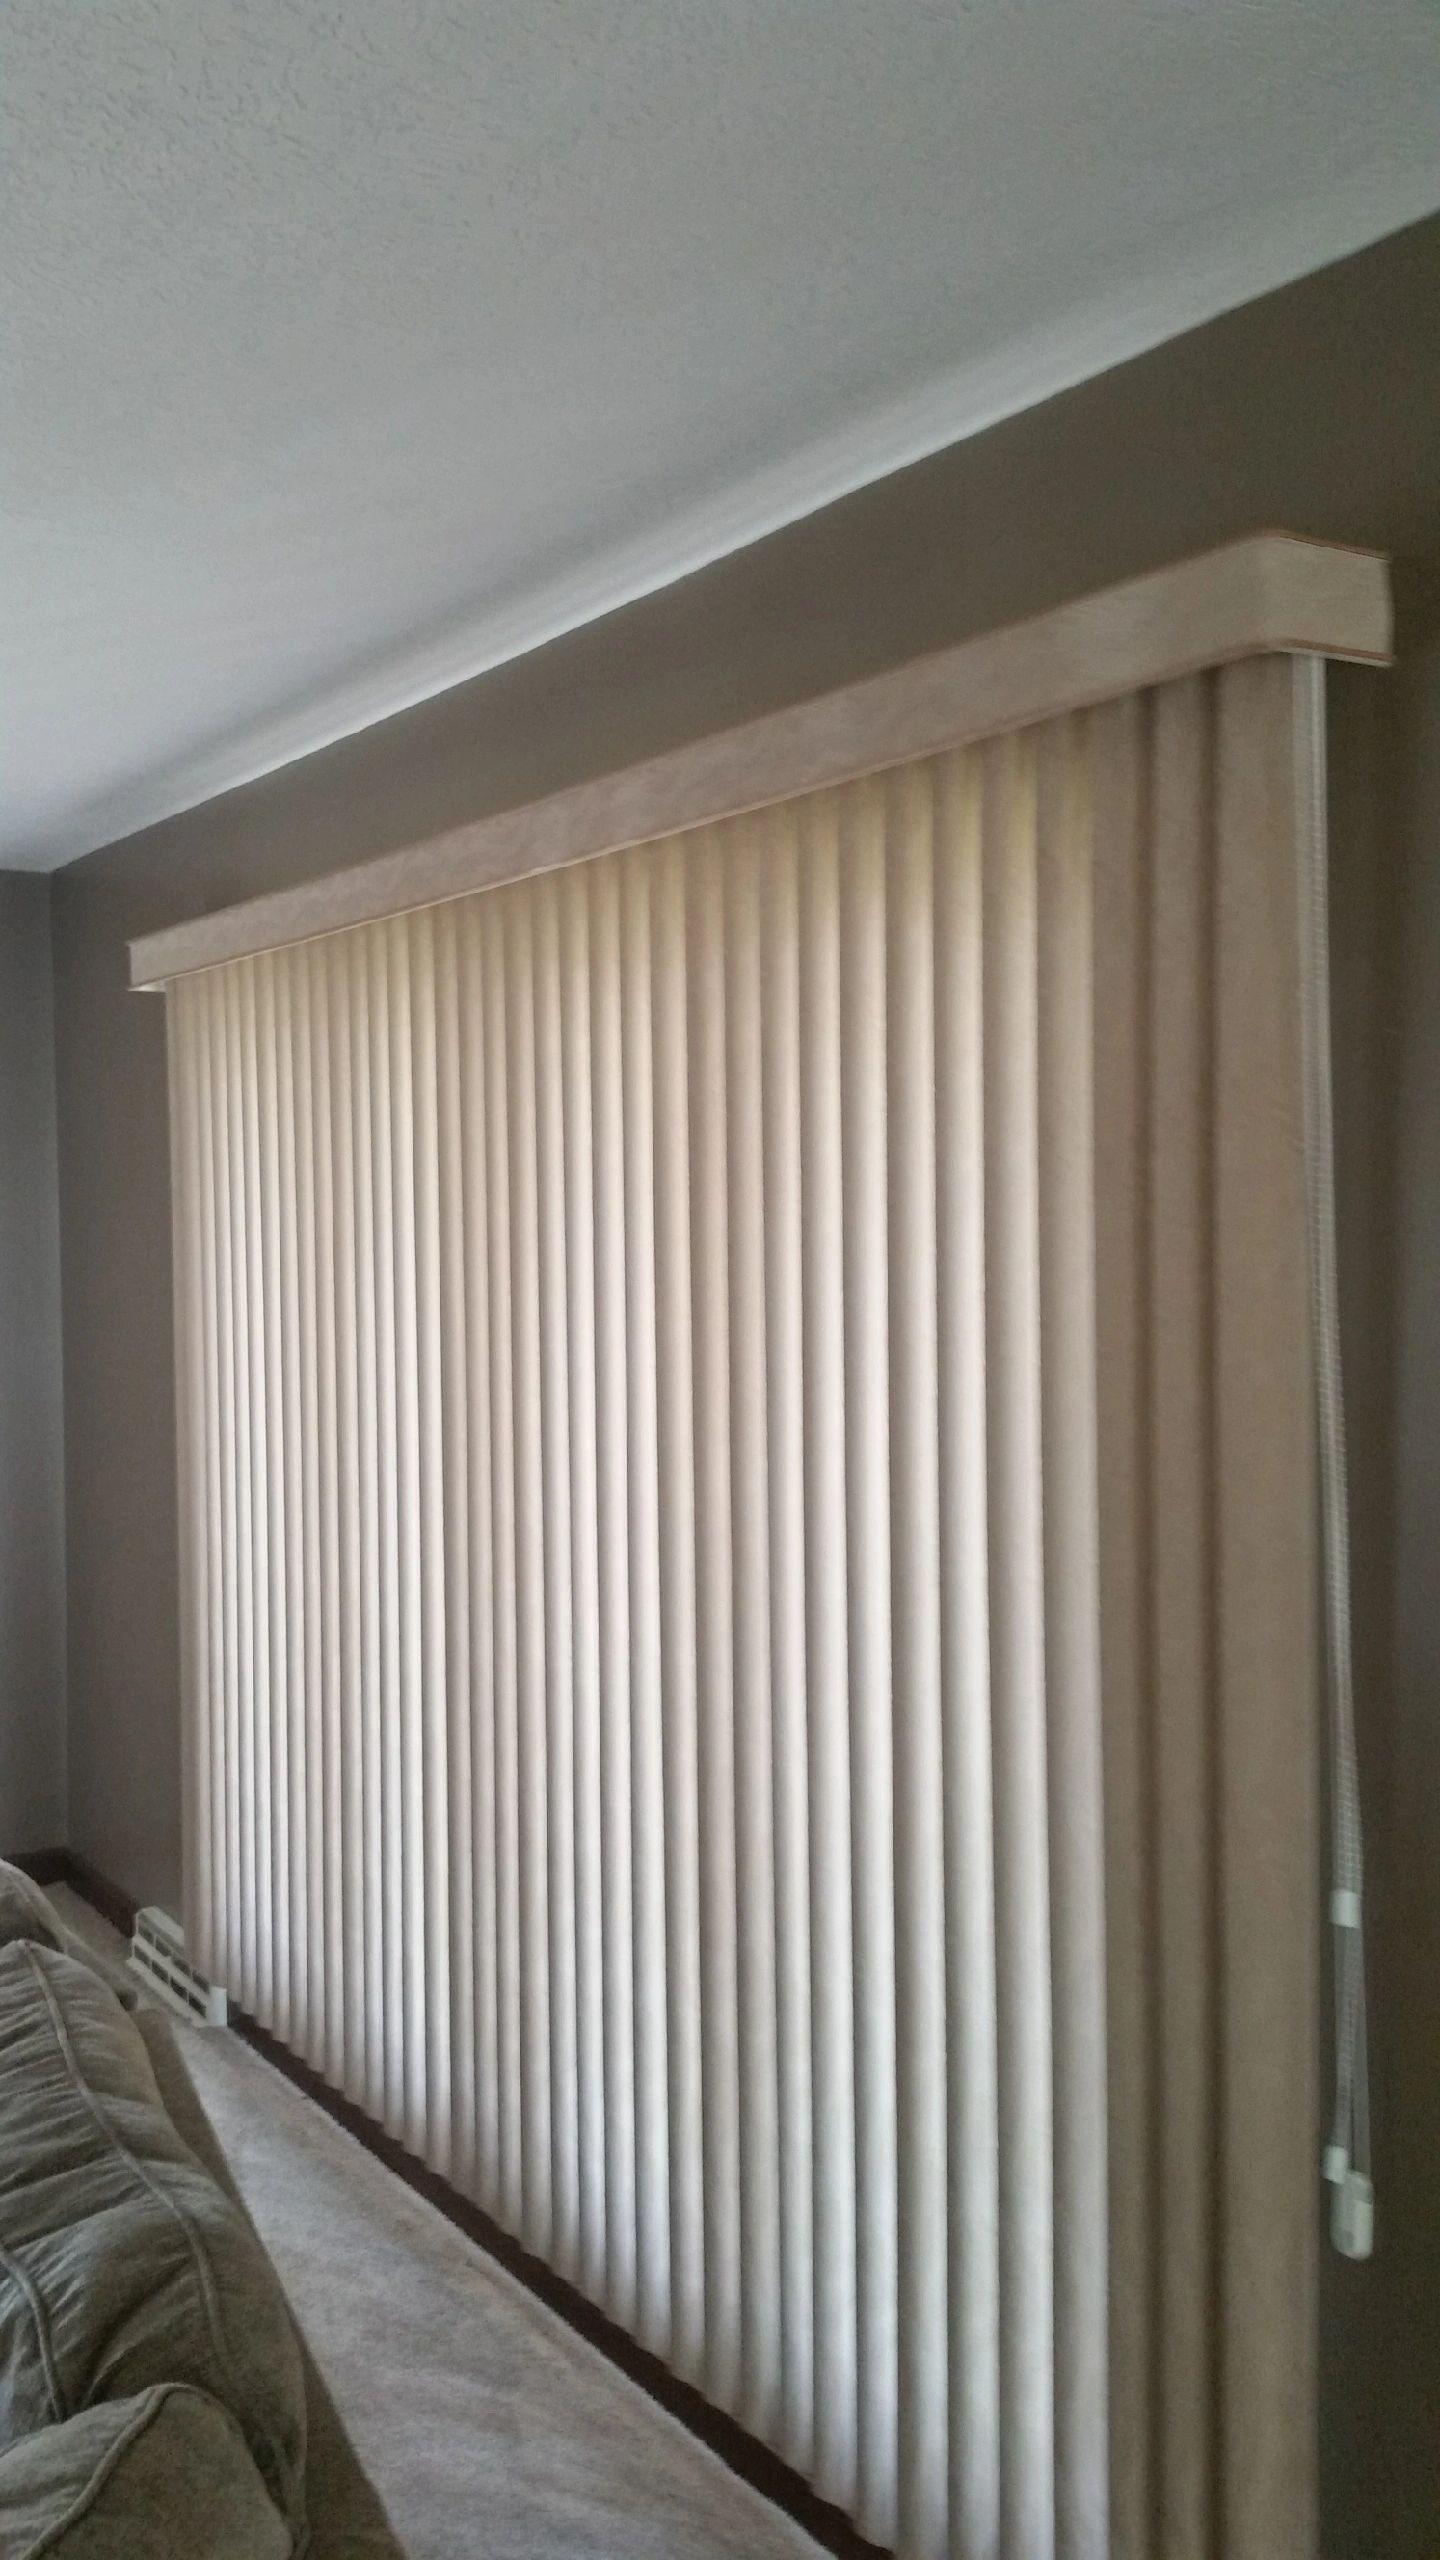 Vertical blinds with Single Deluxe Valance. Featuring the industry's best Decomatic headrail